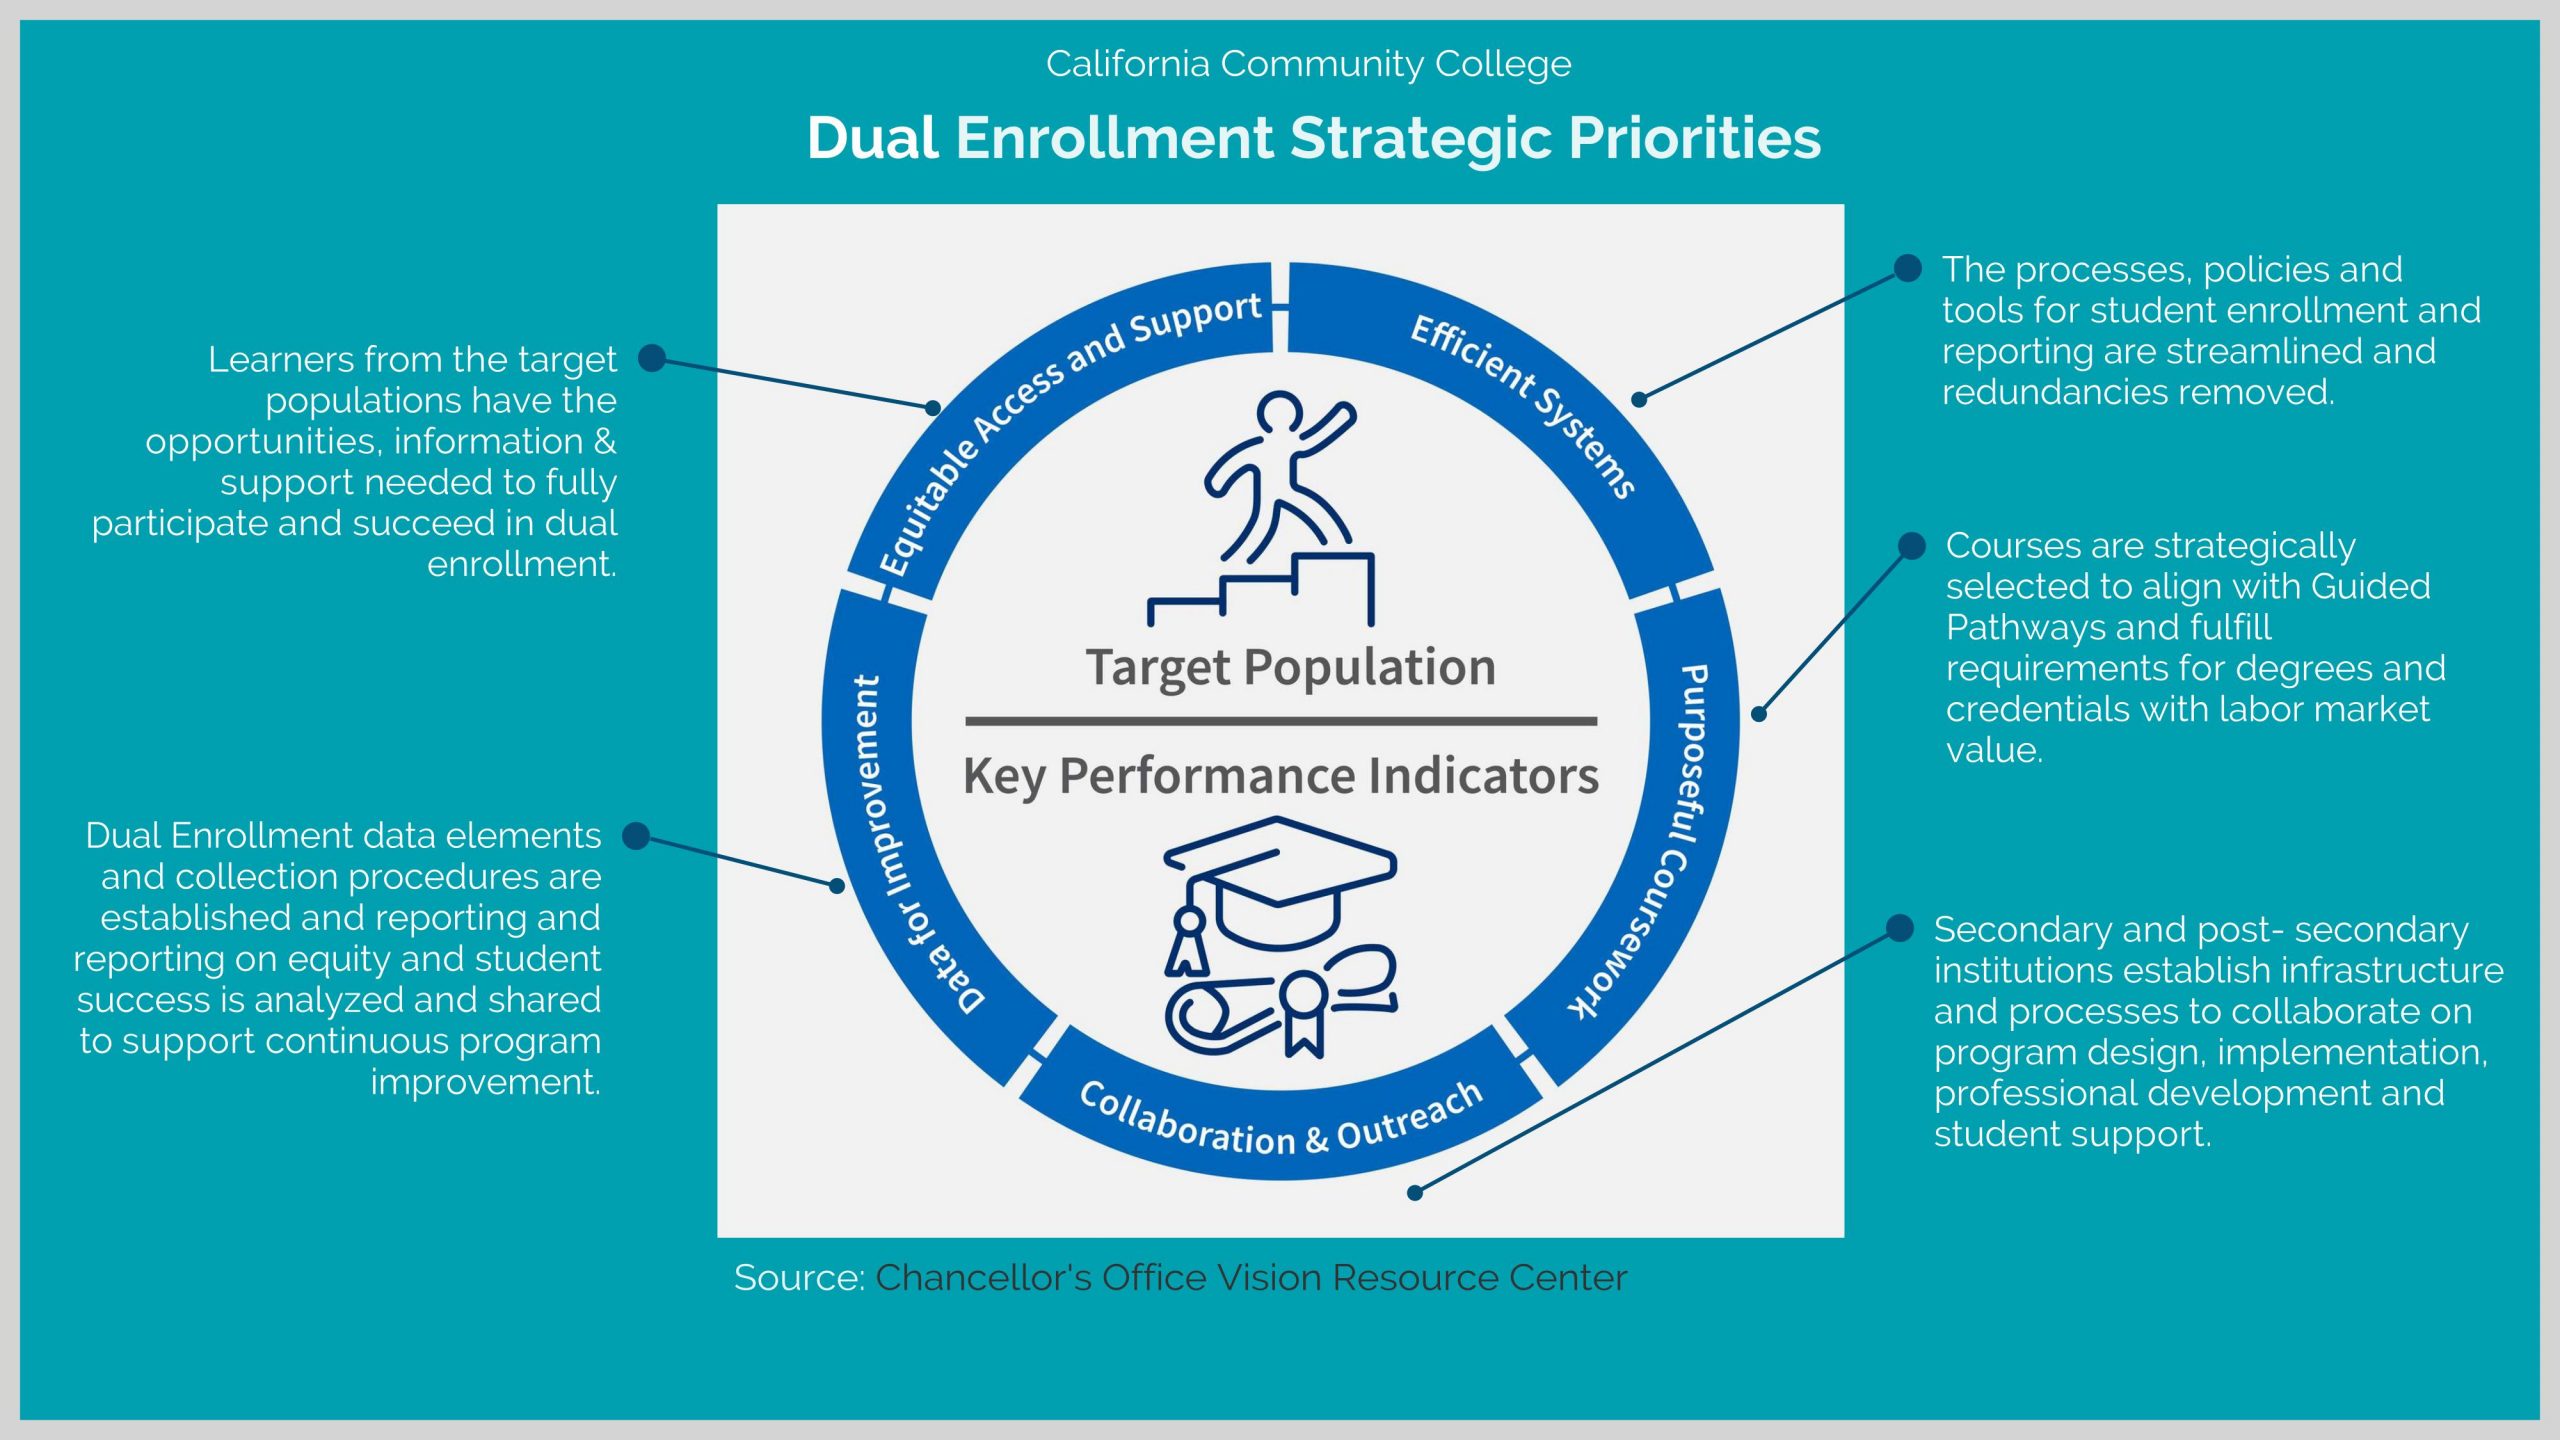 Improving College Access and Success through Dual Enrollment